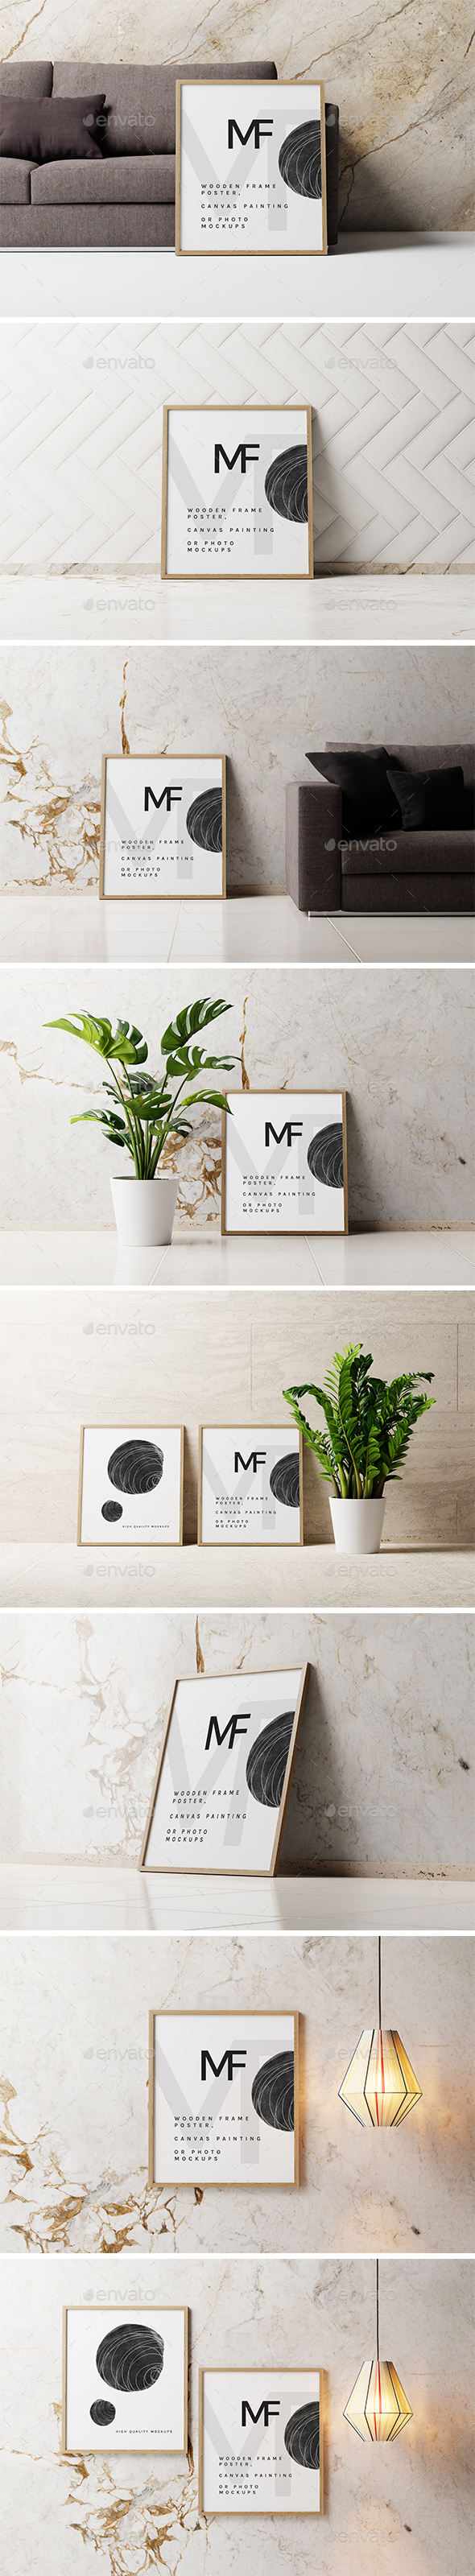 [DOWNLOAD]Canvas painting or Photo Mockups